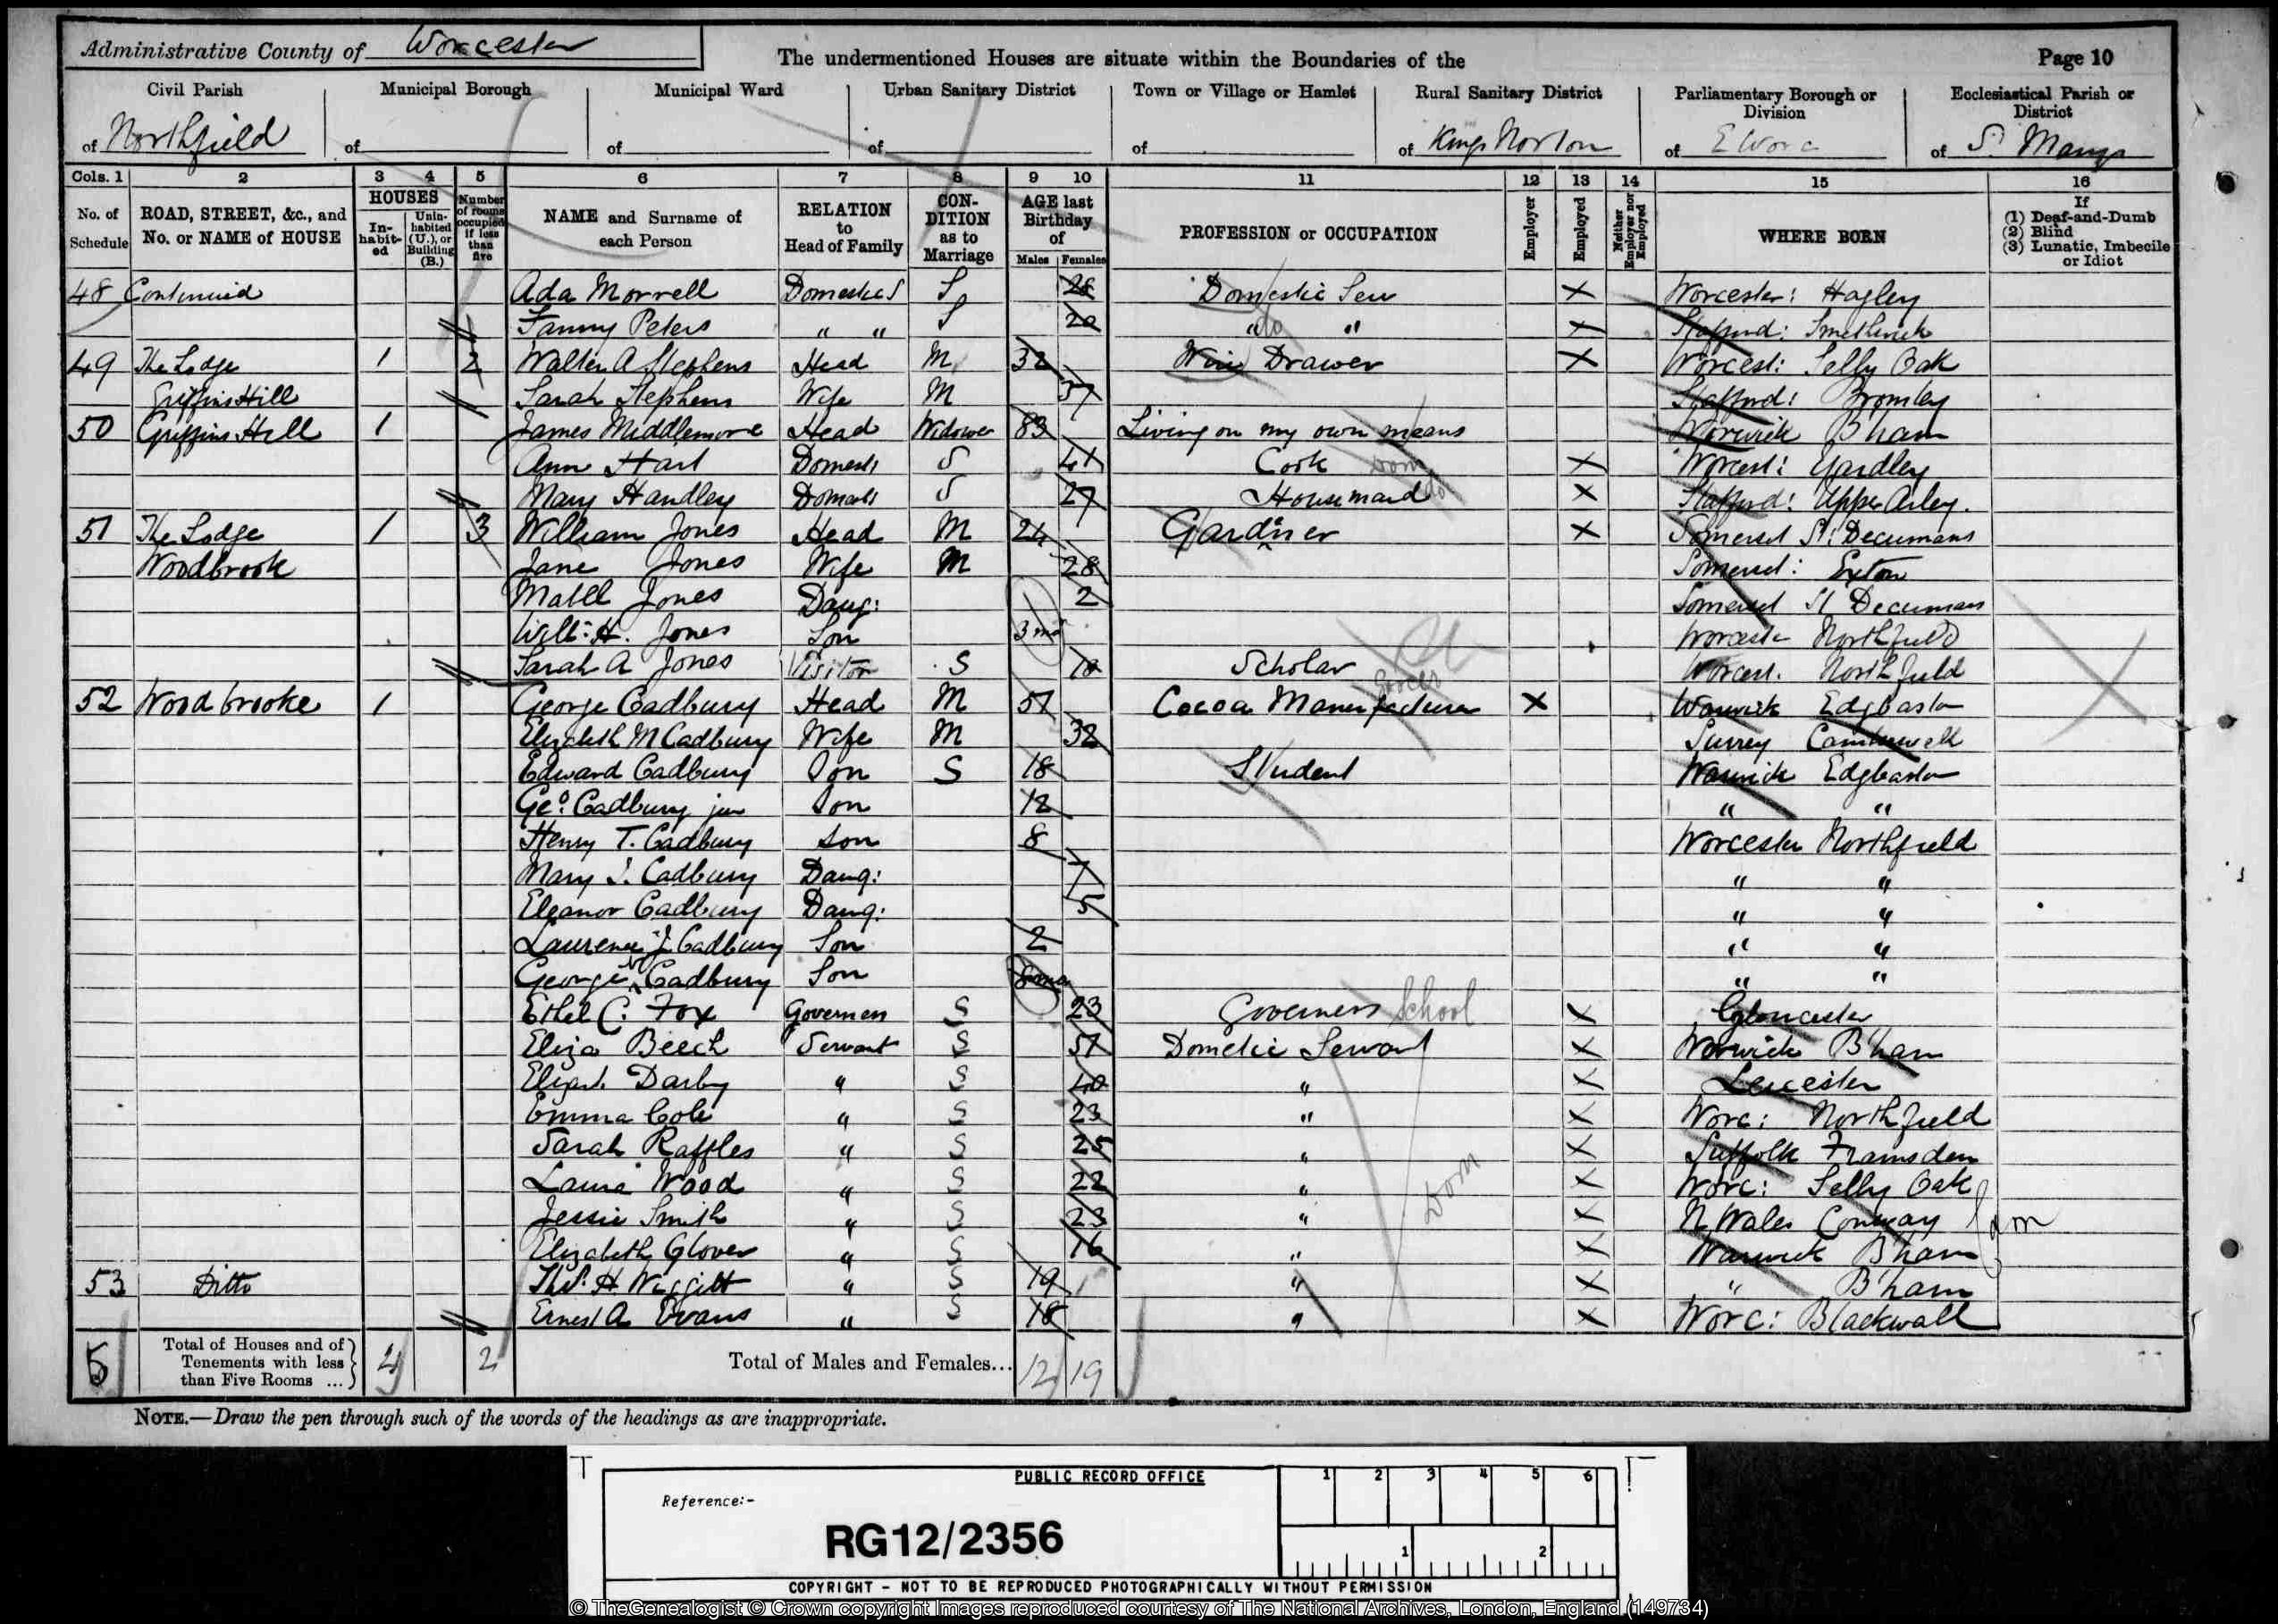 1891 census from TheGenelogist